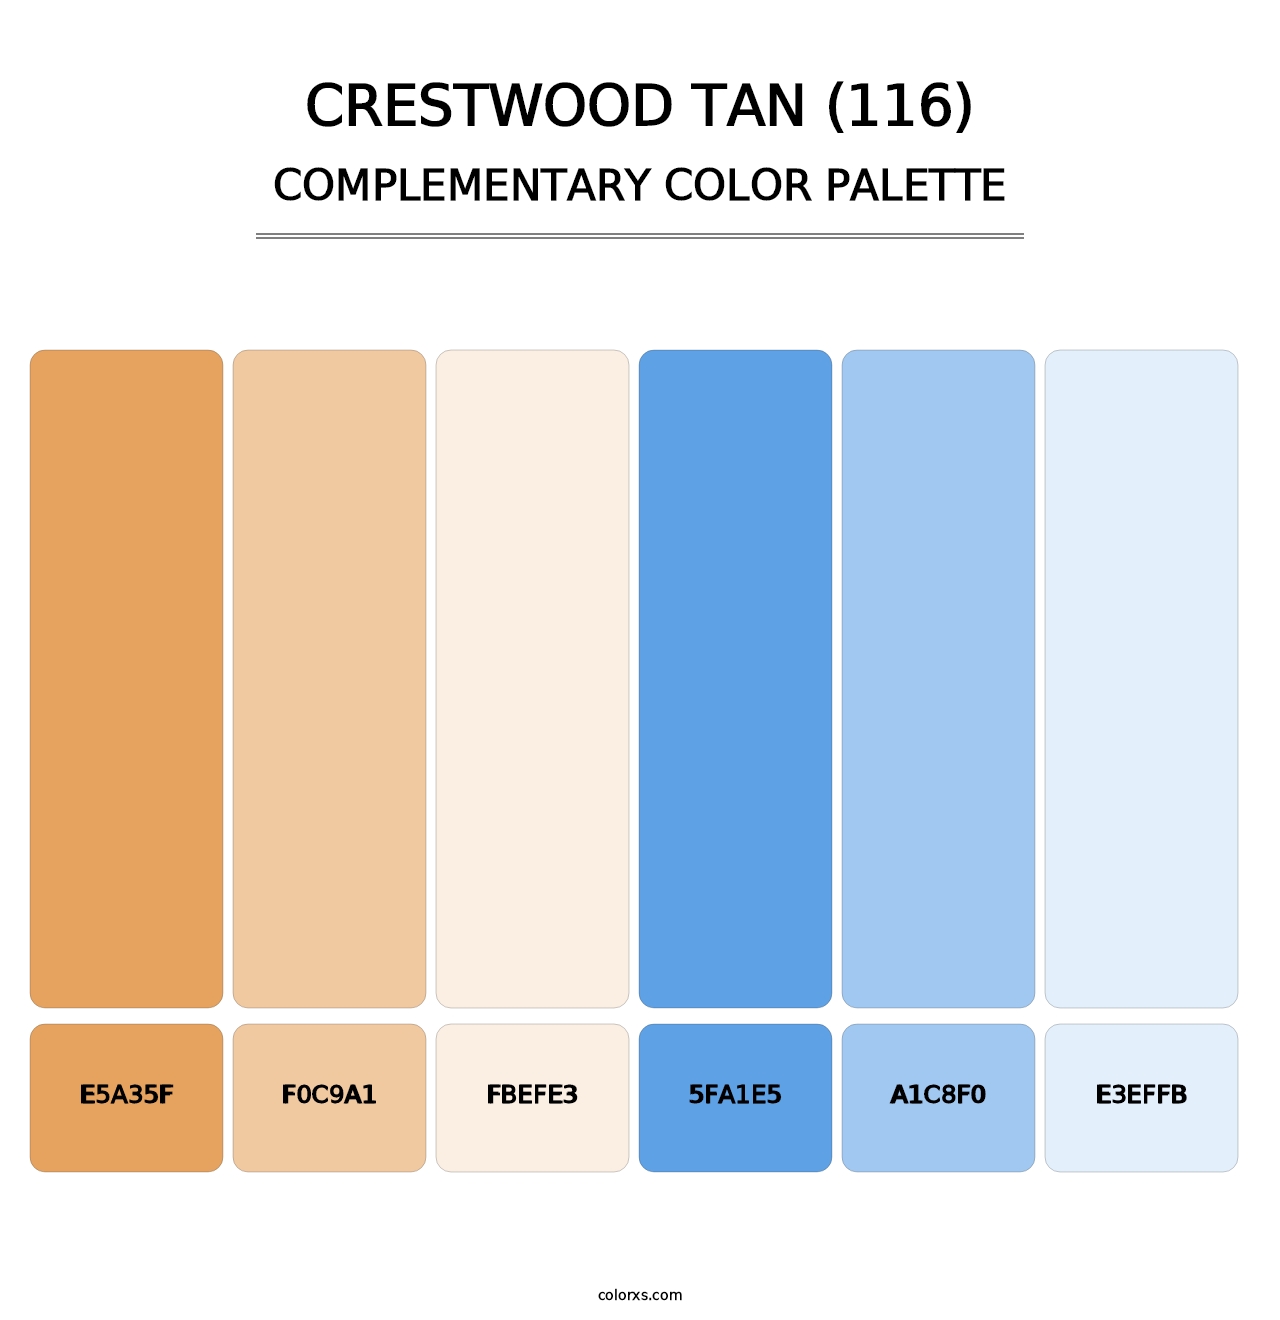 Crestwood Tan (116) - Complementary Color Palette